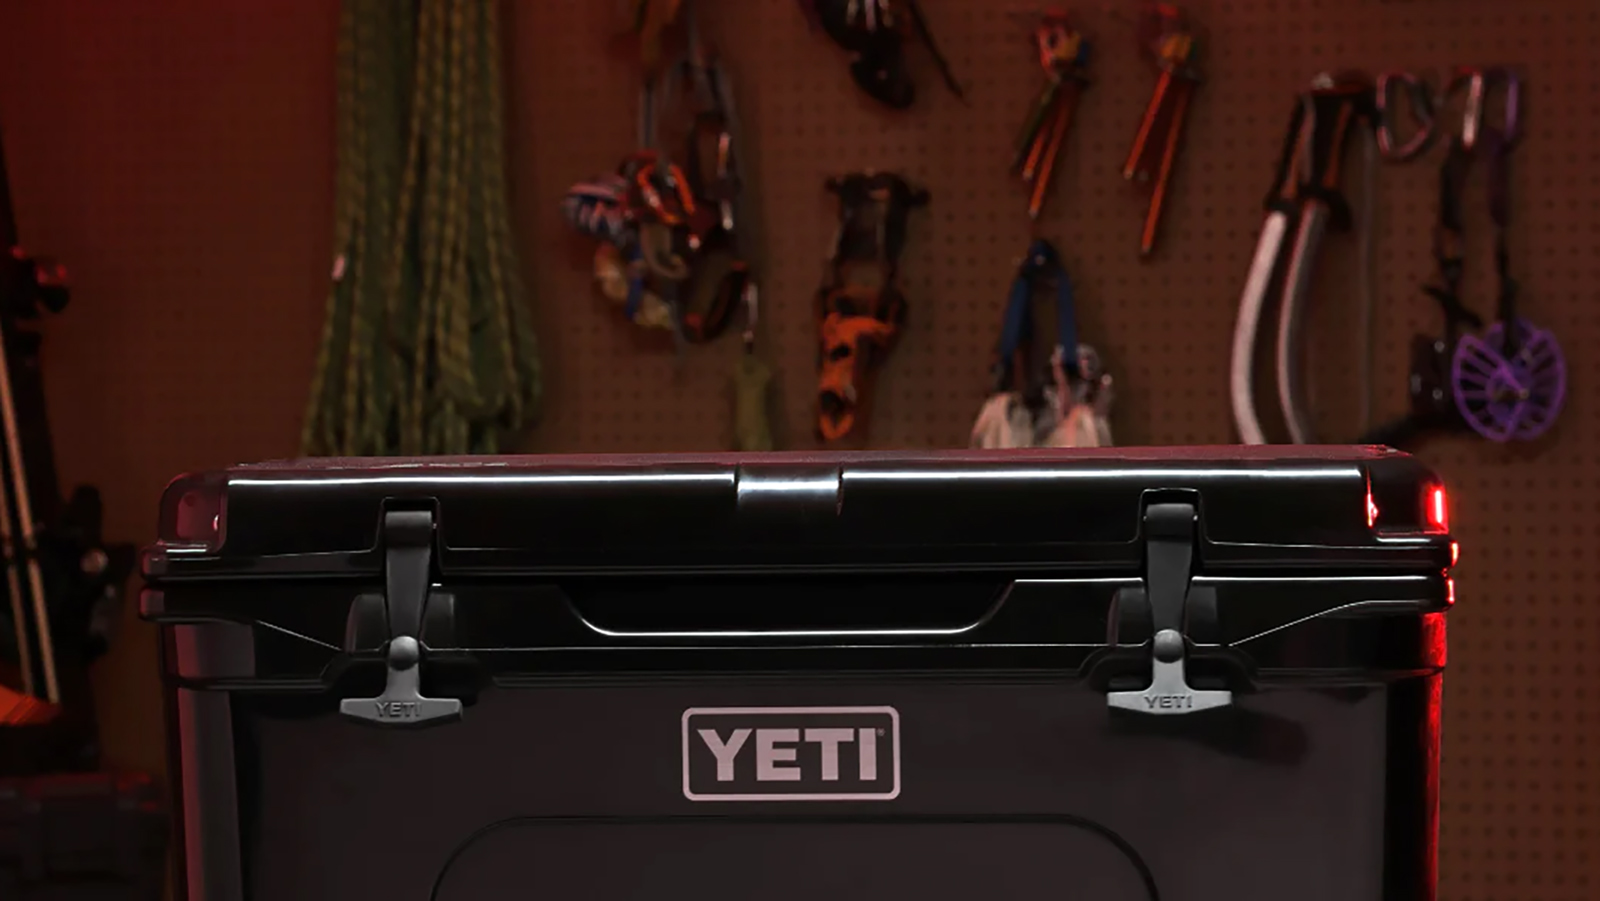 YETI launches new cocktail shaker in time for the festive season